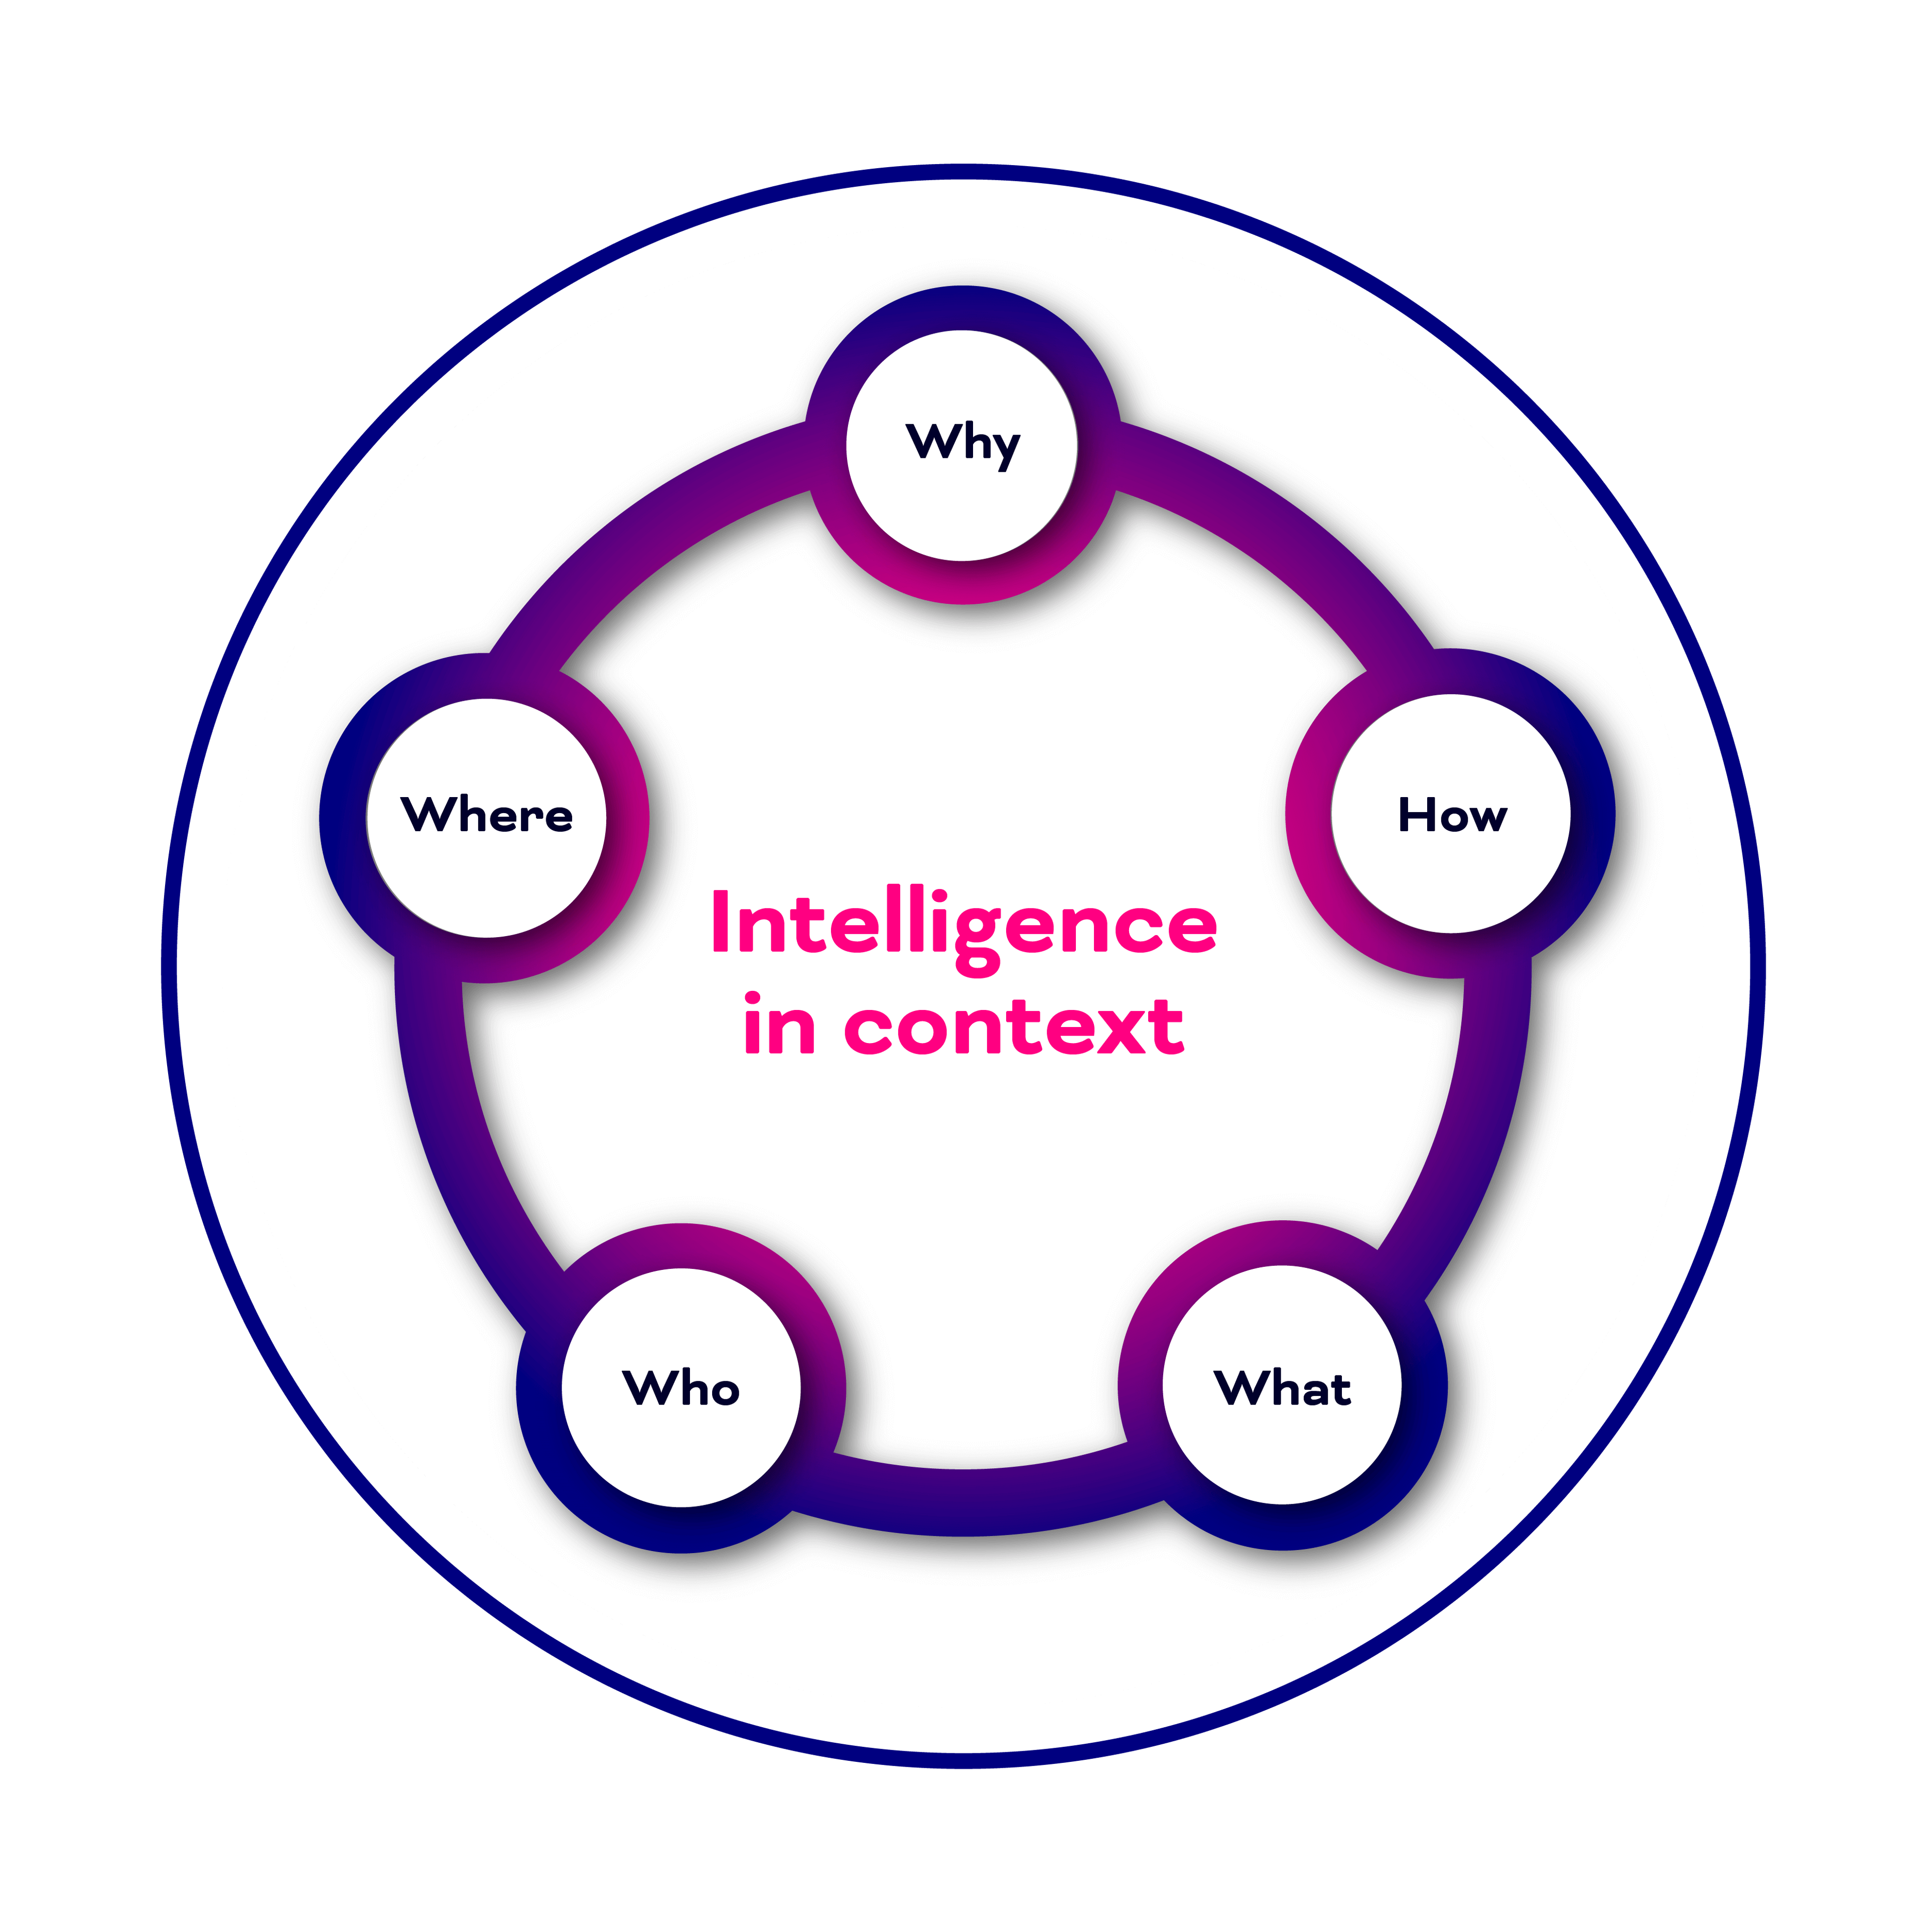 Intelligence in context